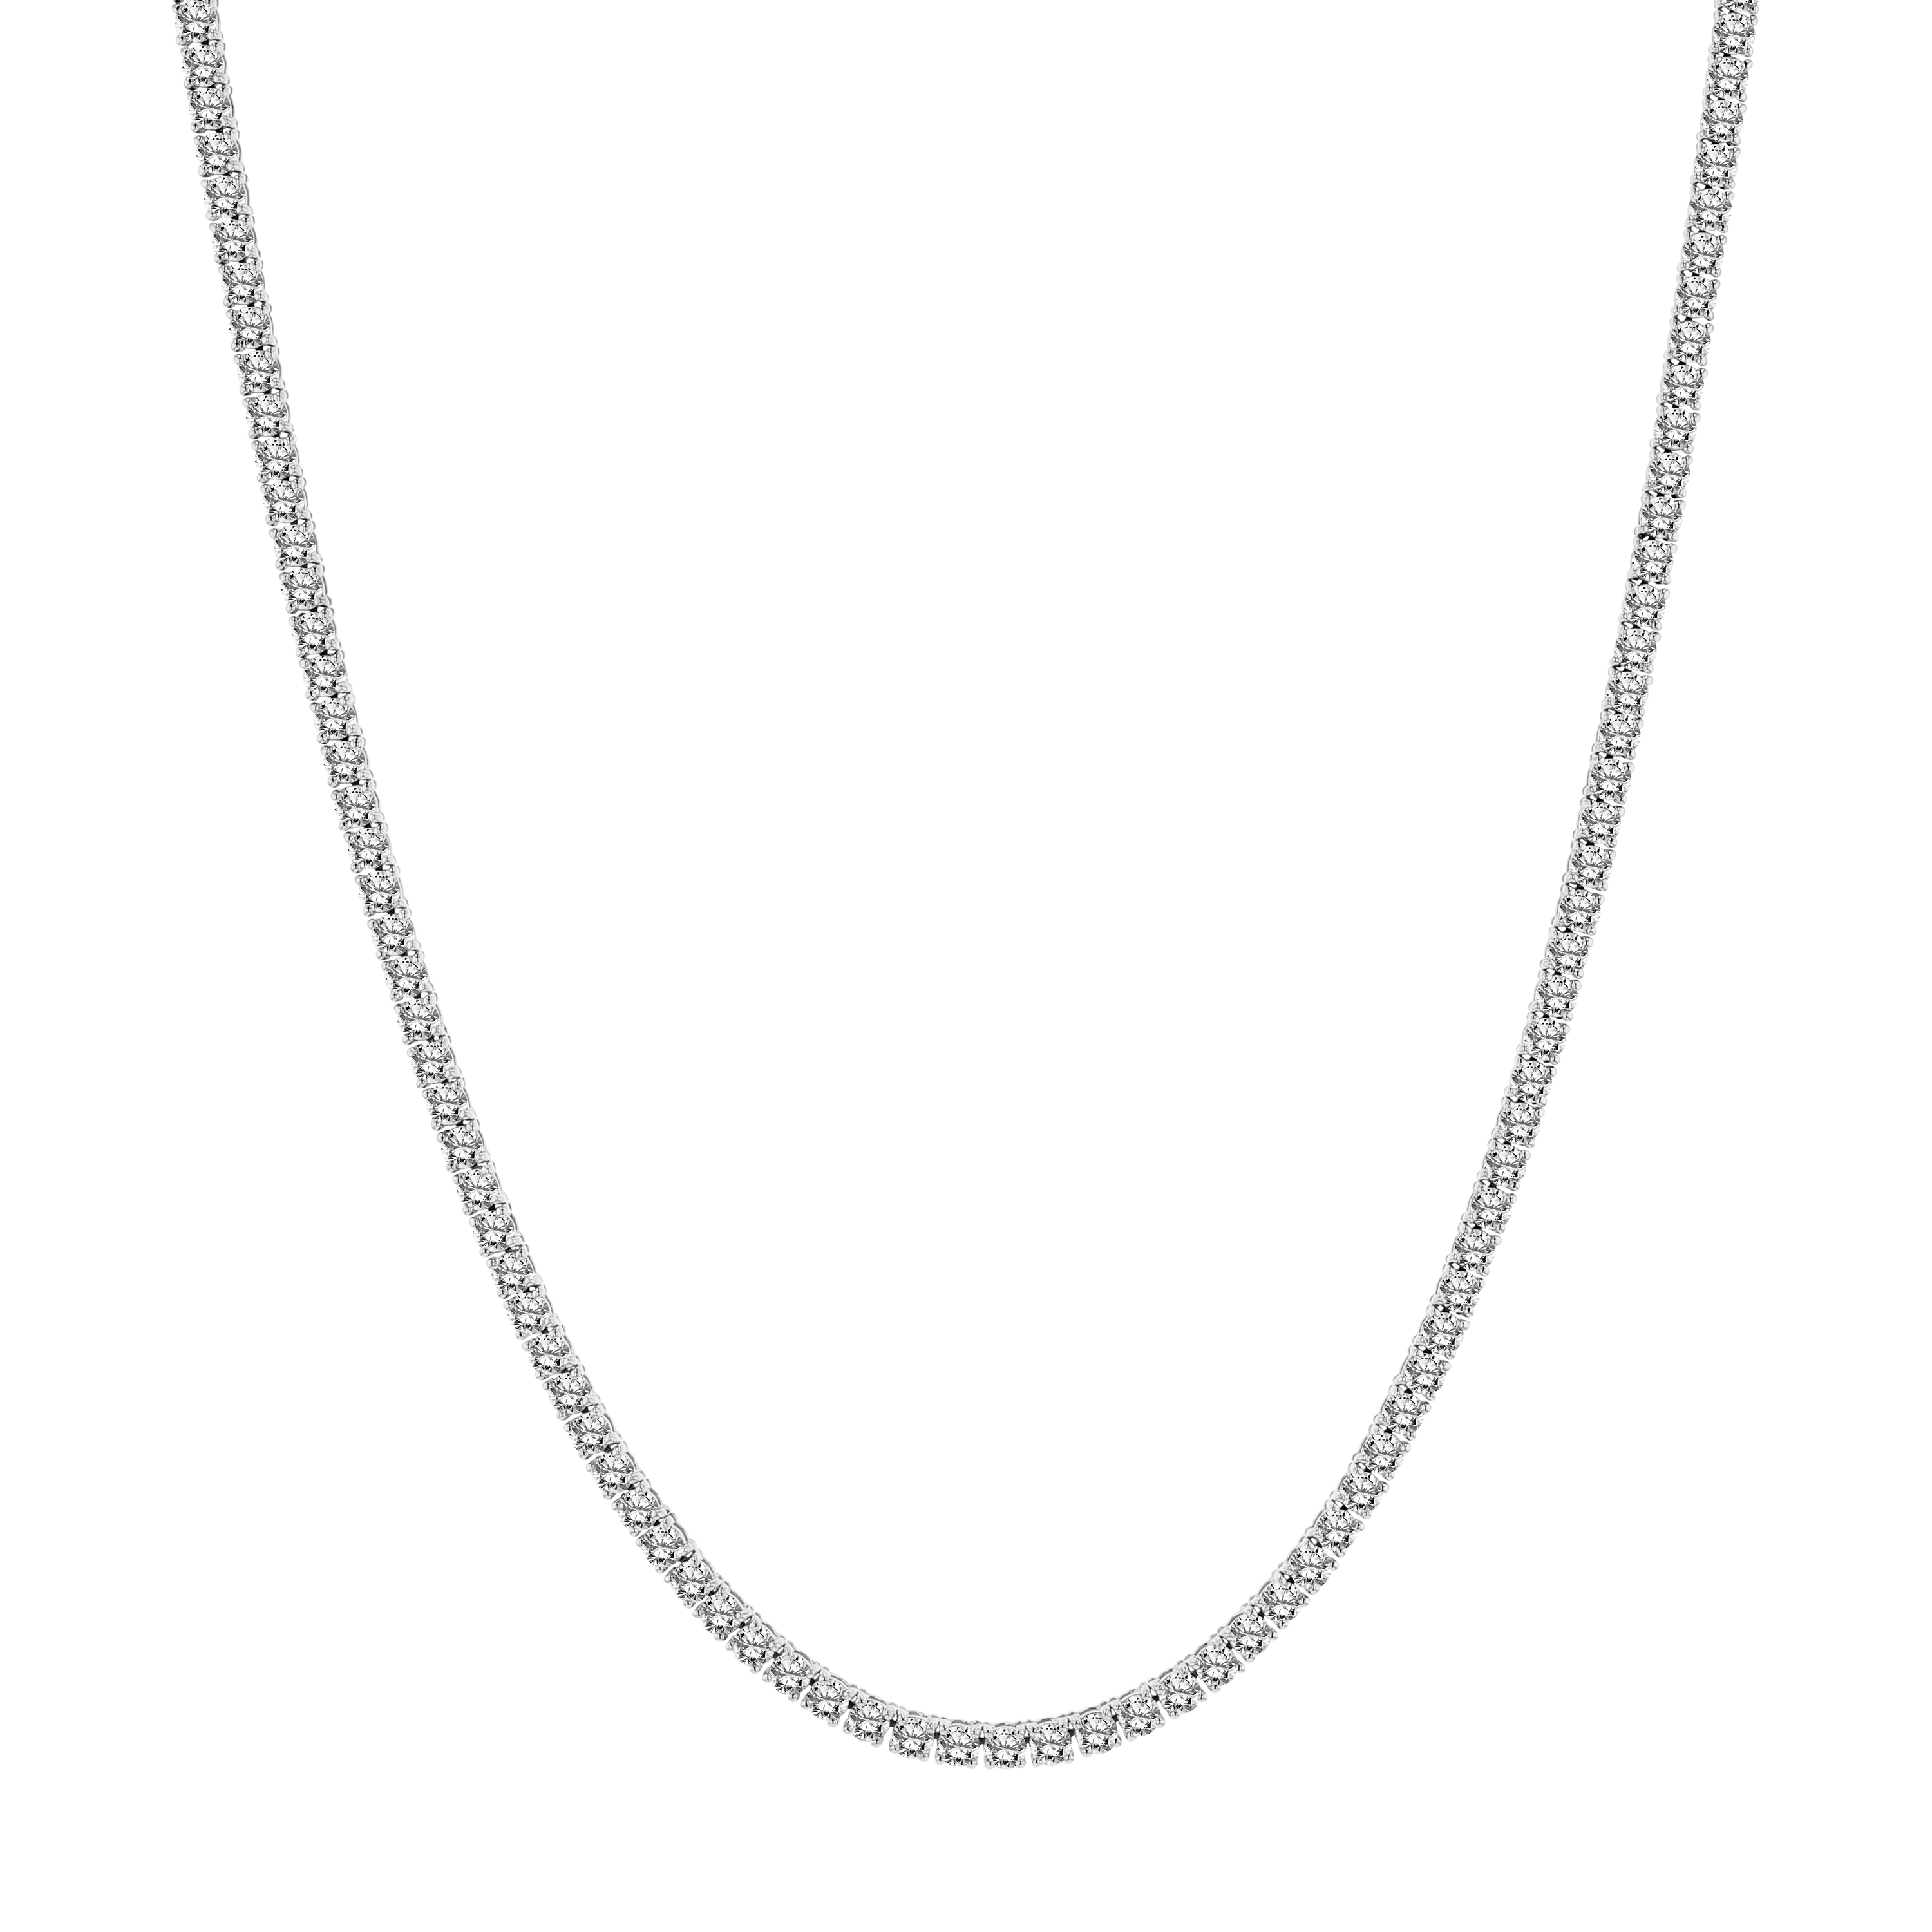 View 6.00ctw Diamond Straight Size Tennis Necklace in 14k White Gold 16 Inches